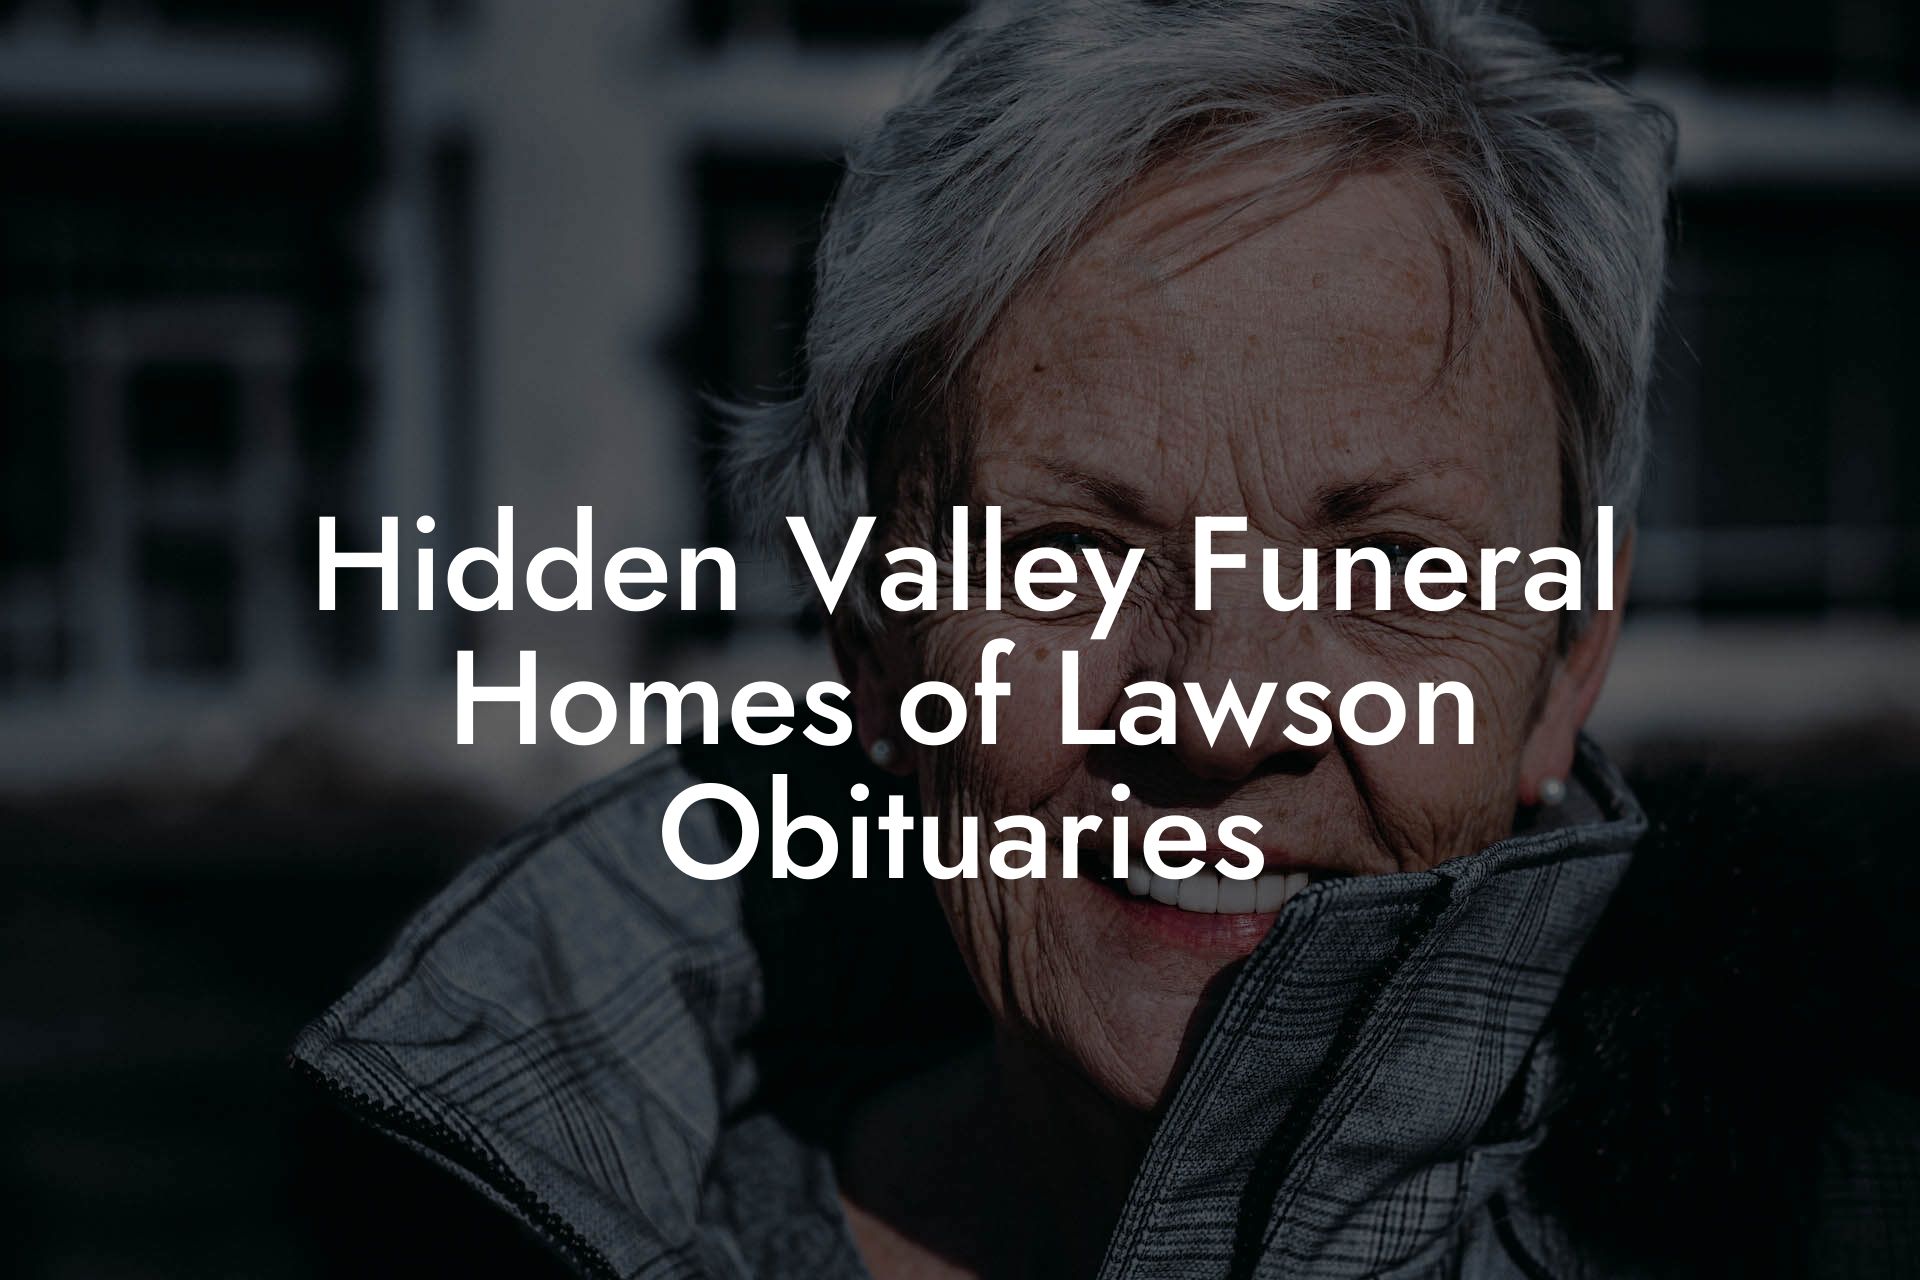 Hidden Valley Funeral Homes of Lawson Obituaries